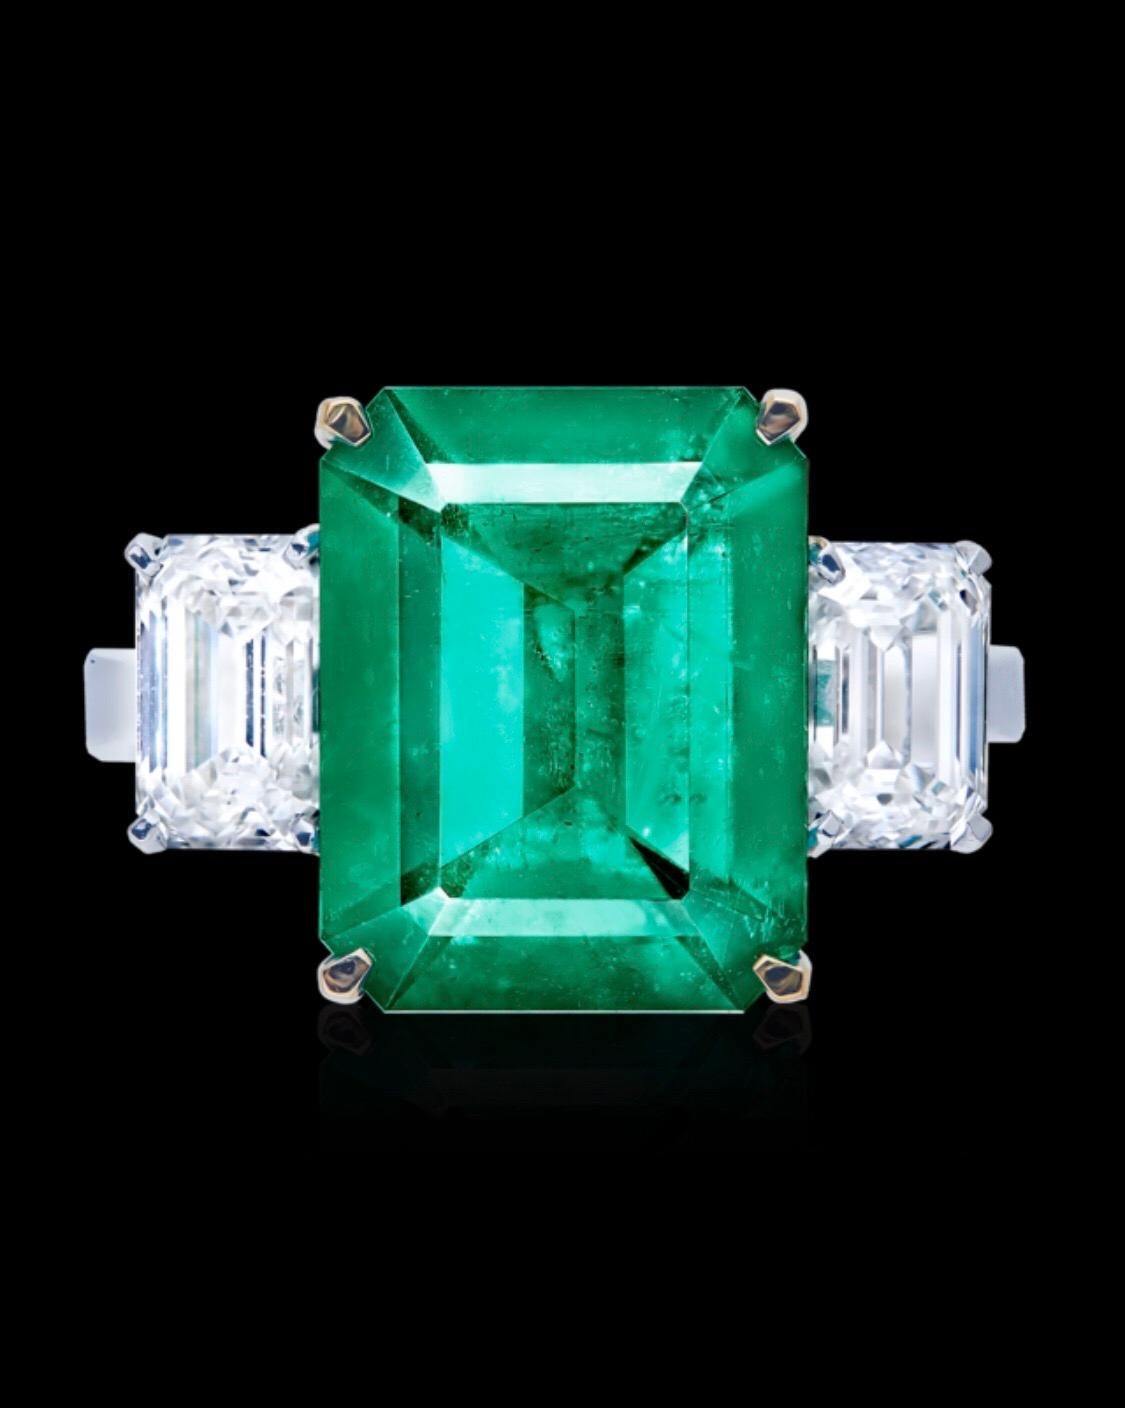 Showcasing a very special certified 6 carat very clean natural unenhanced, no oil Colombian Emerald Ring. Emilio Jewelry is a leader in collectible no oil emerald pieces. Hand made in the Emilio Jewelry Atelier, whom specializes in rare collectible